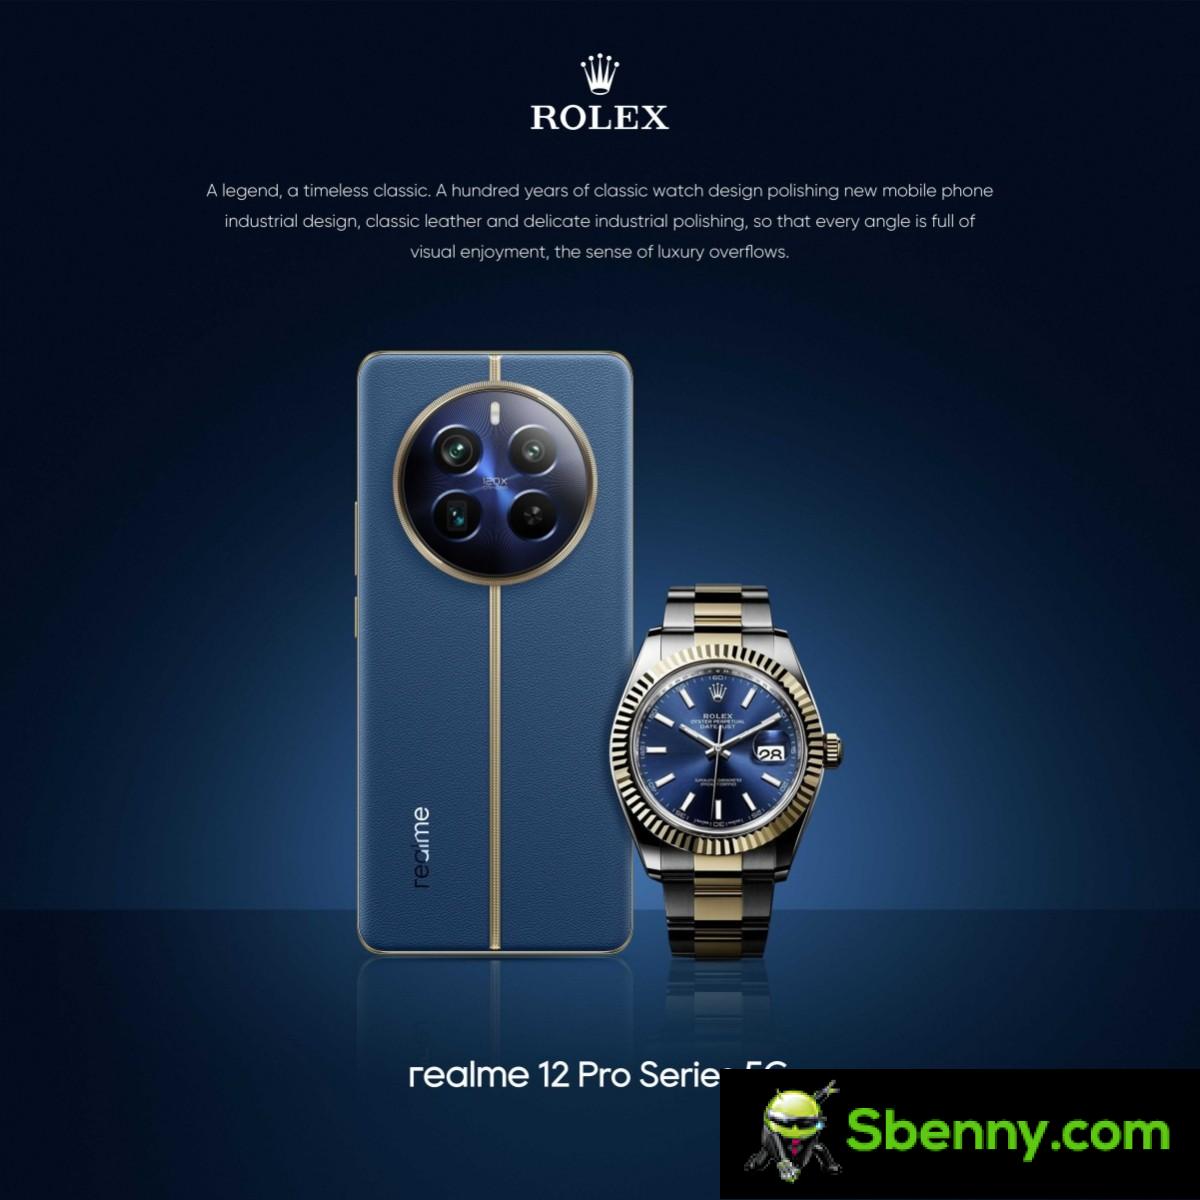 Realme will collaborate with Rolex in the upcoming 12 Pro series